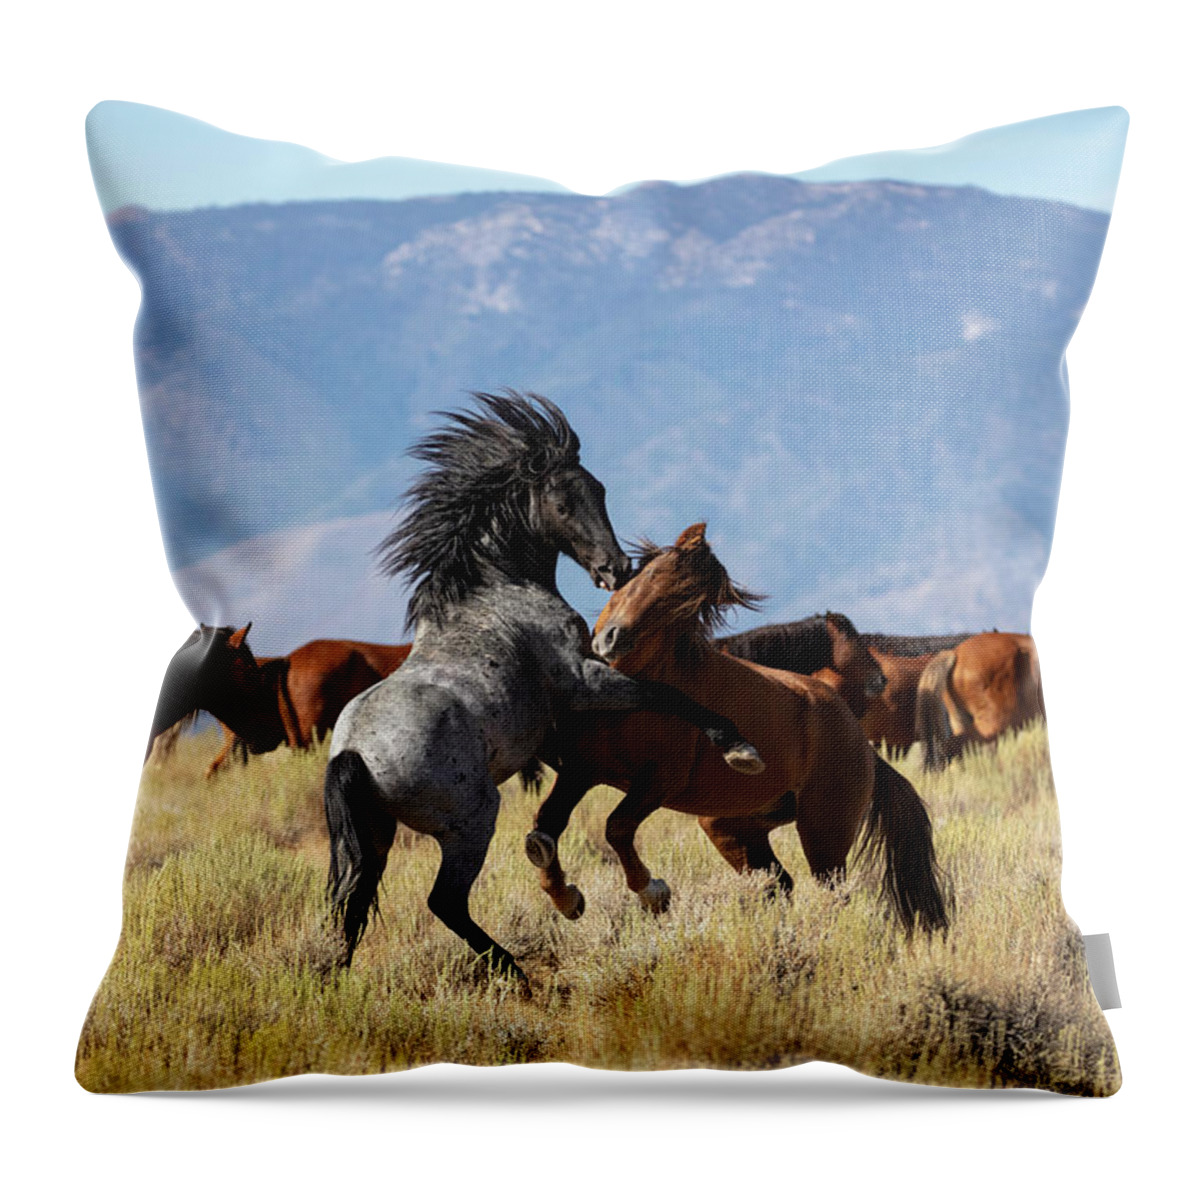  Throw Pillow featuring the photograph _t__7224 by John T Humphrey